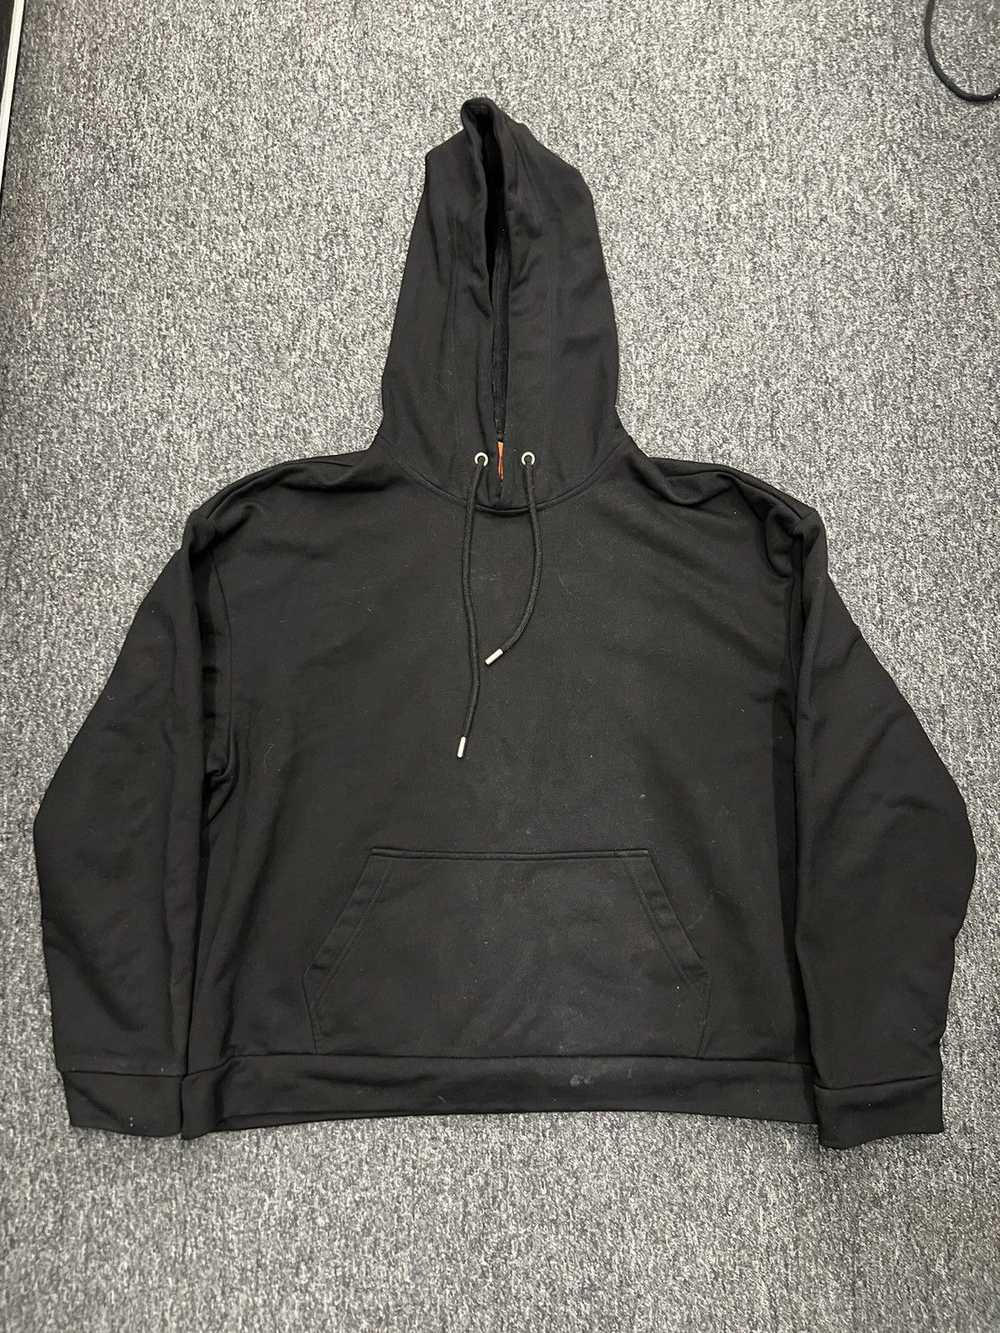 Who Decides War Signature Blank hoodie - image 1